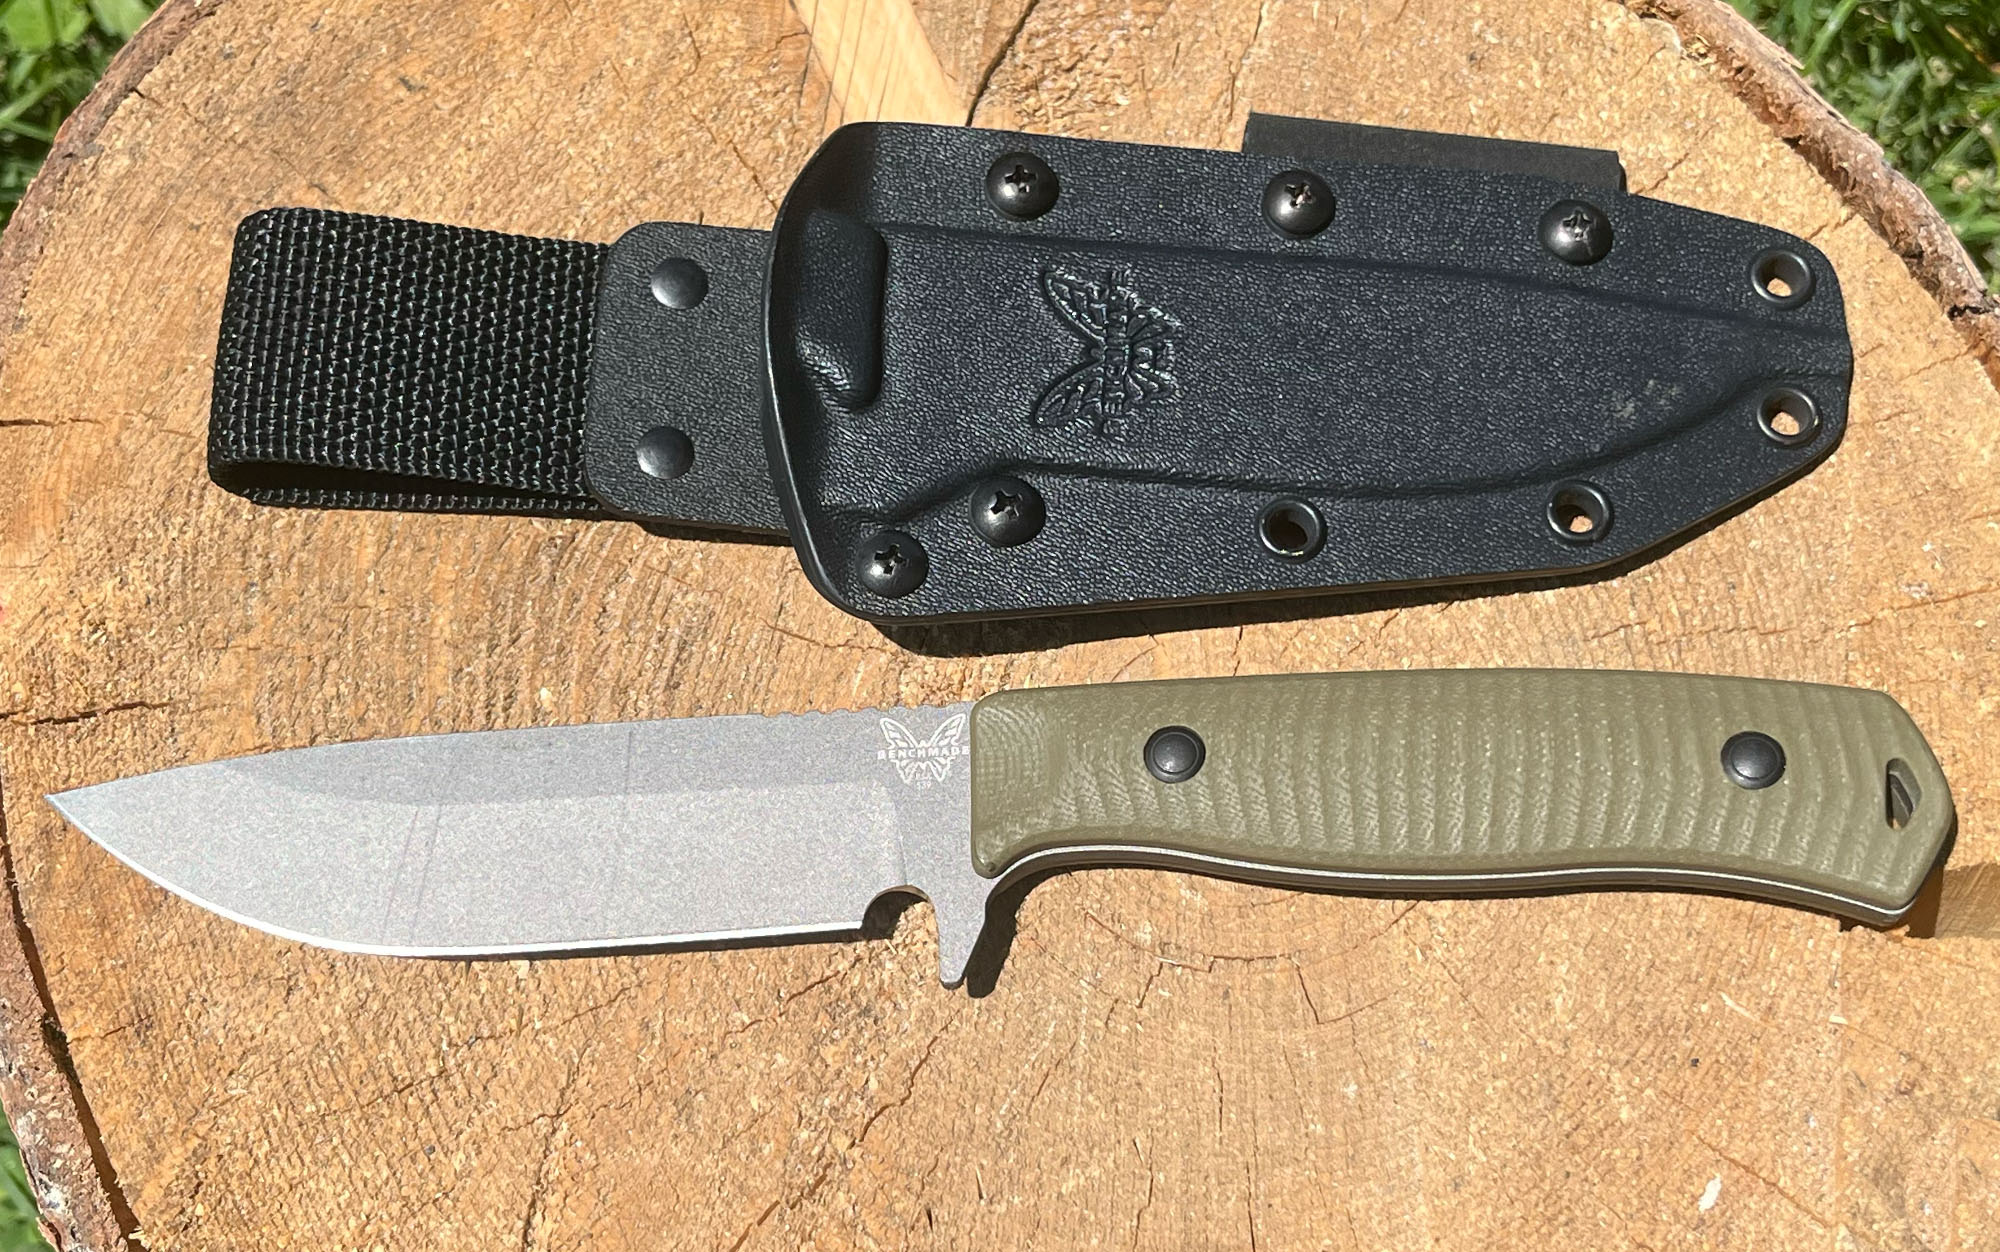 We tested the Benchmade Anonimus.